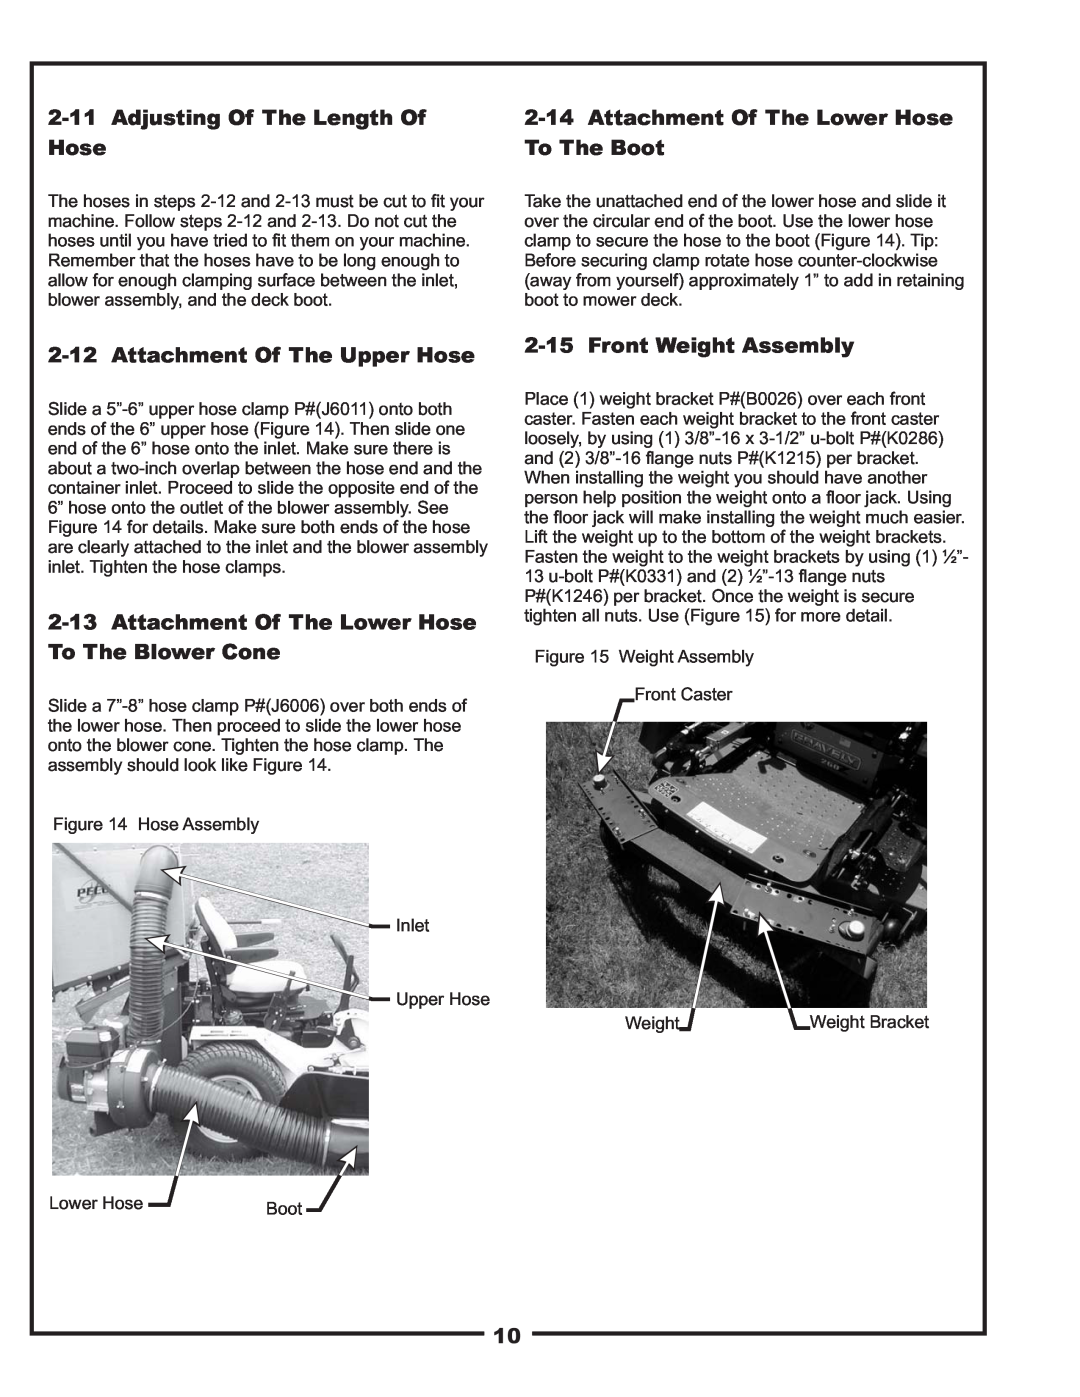 Gravely 12621209-12 manual Adjusting Of The Length Of Hose, Attachment Of The Lower Hose To The Boot, Front Weight Assembly 